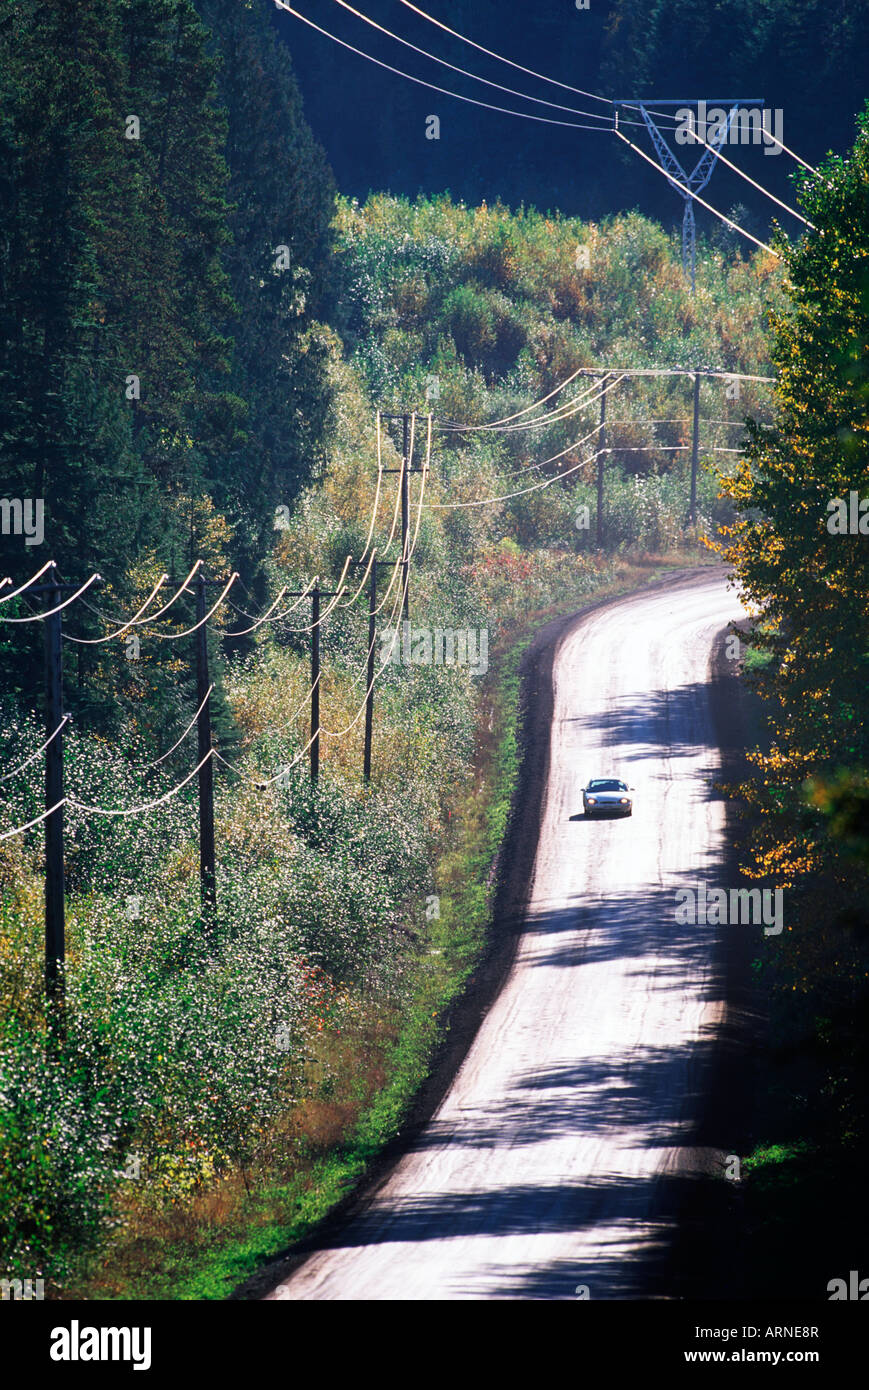 Car on a country road along power lines, British Columbia, Canada. Stock Photo